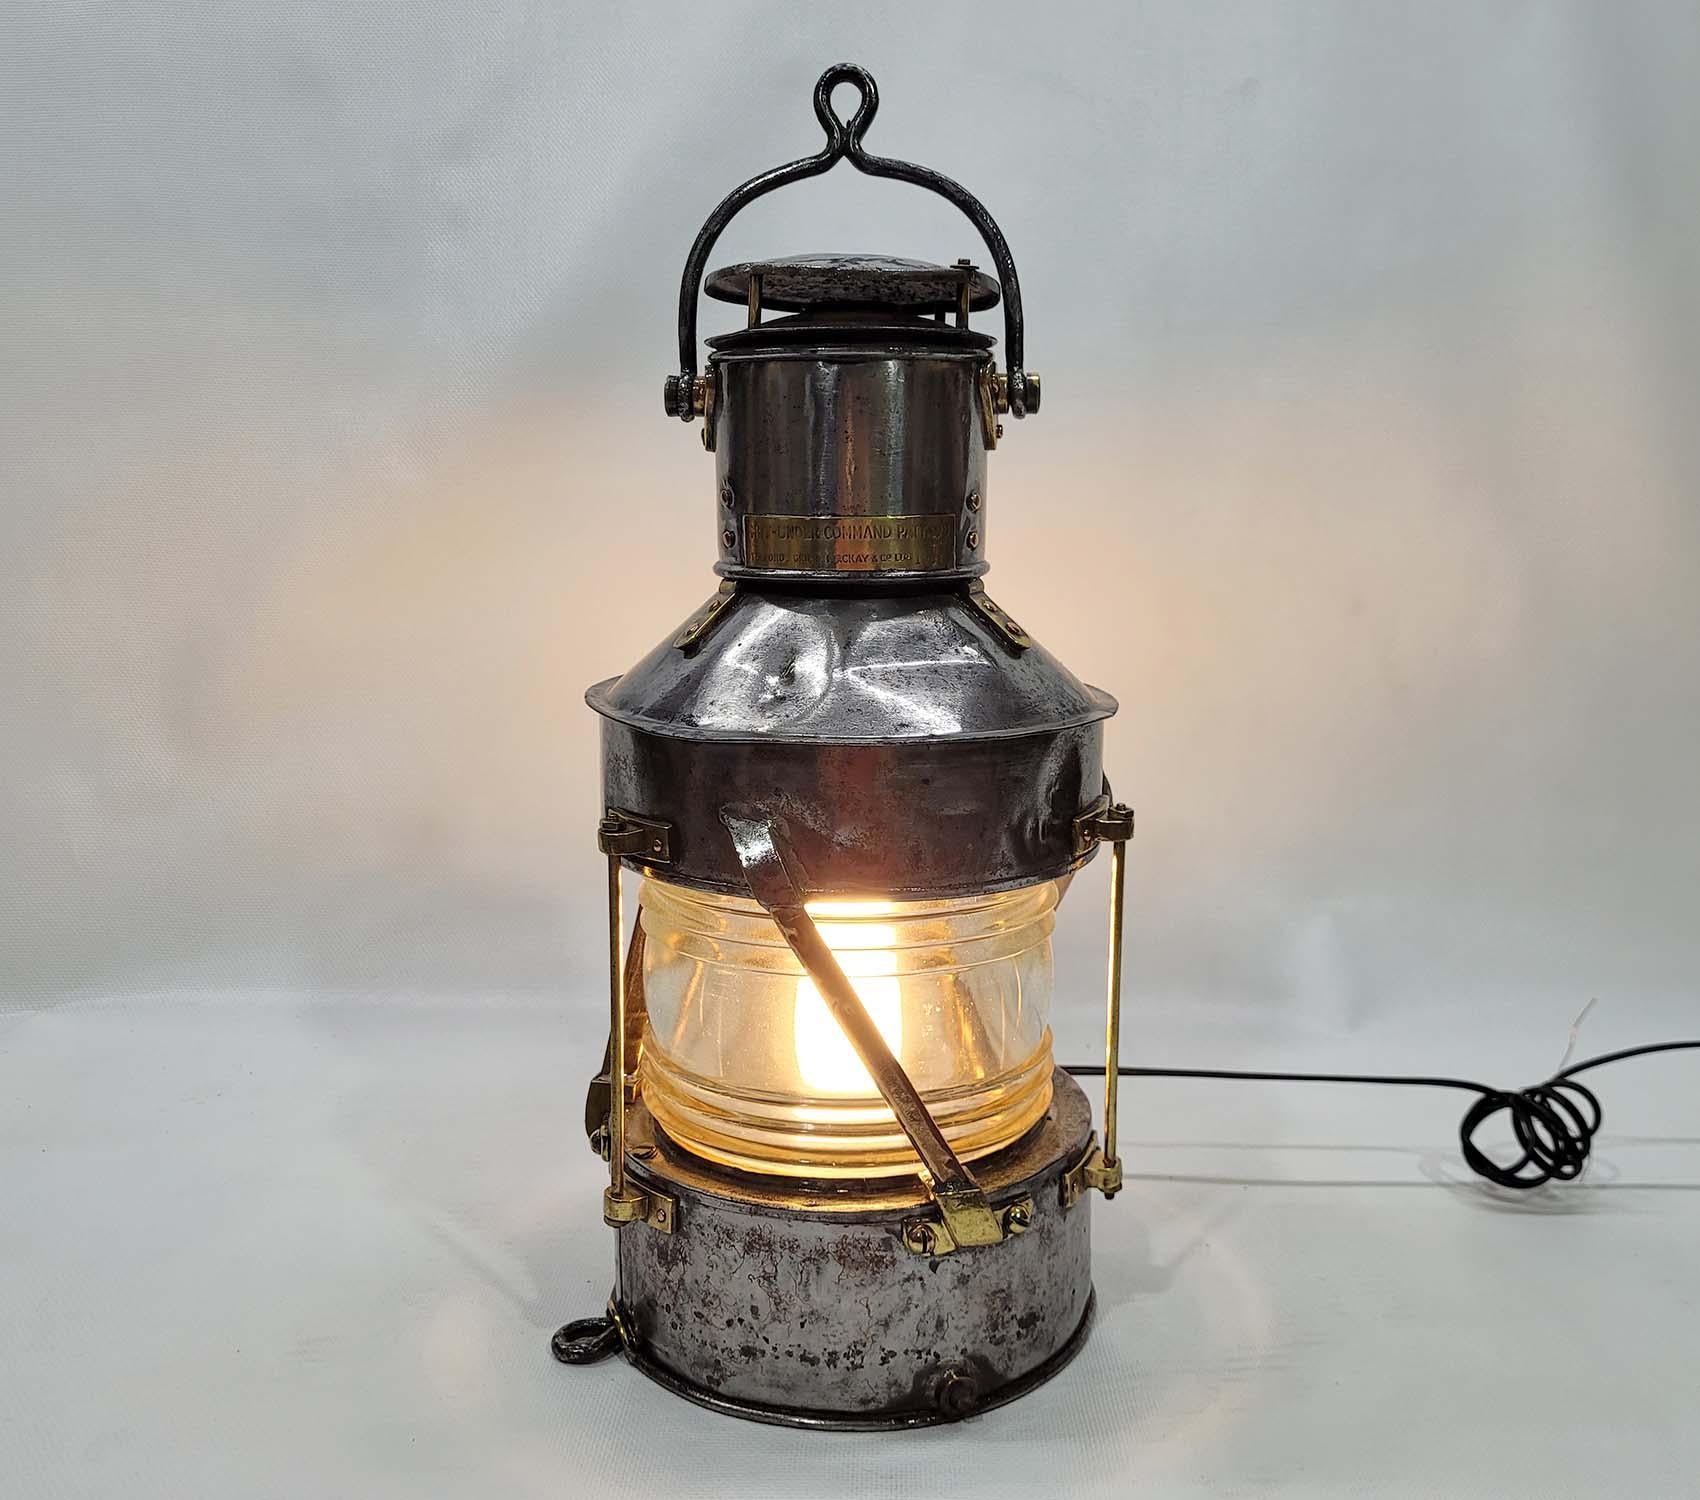 North American Ships Anchor Lantern For Sale